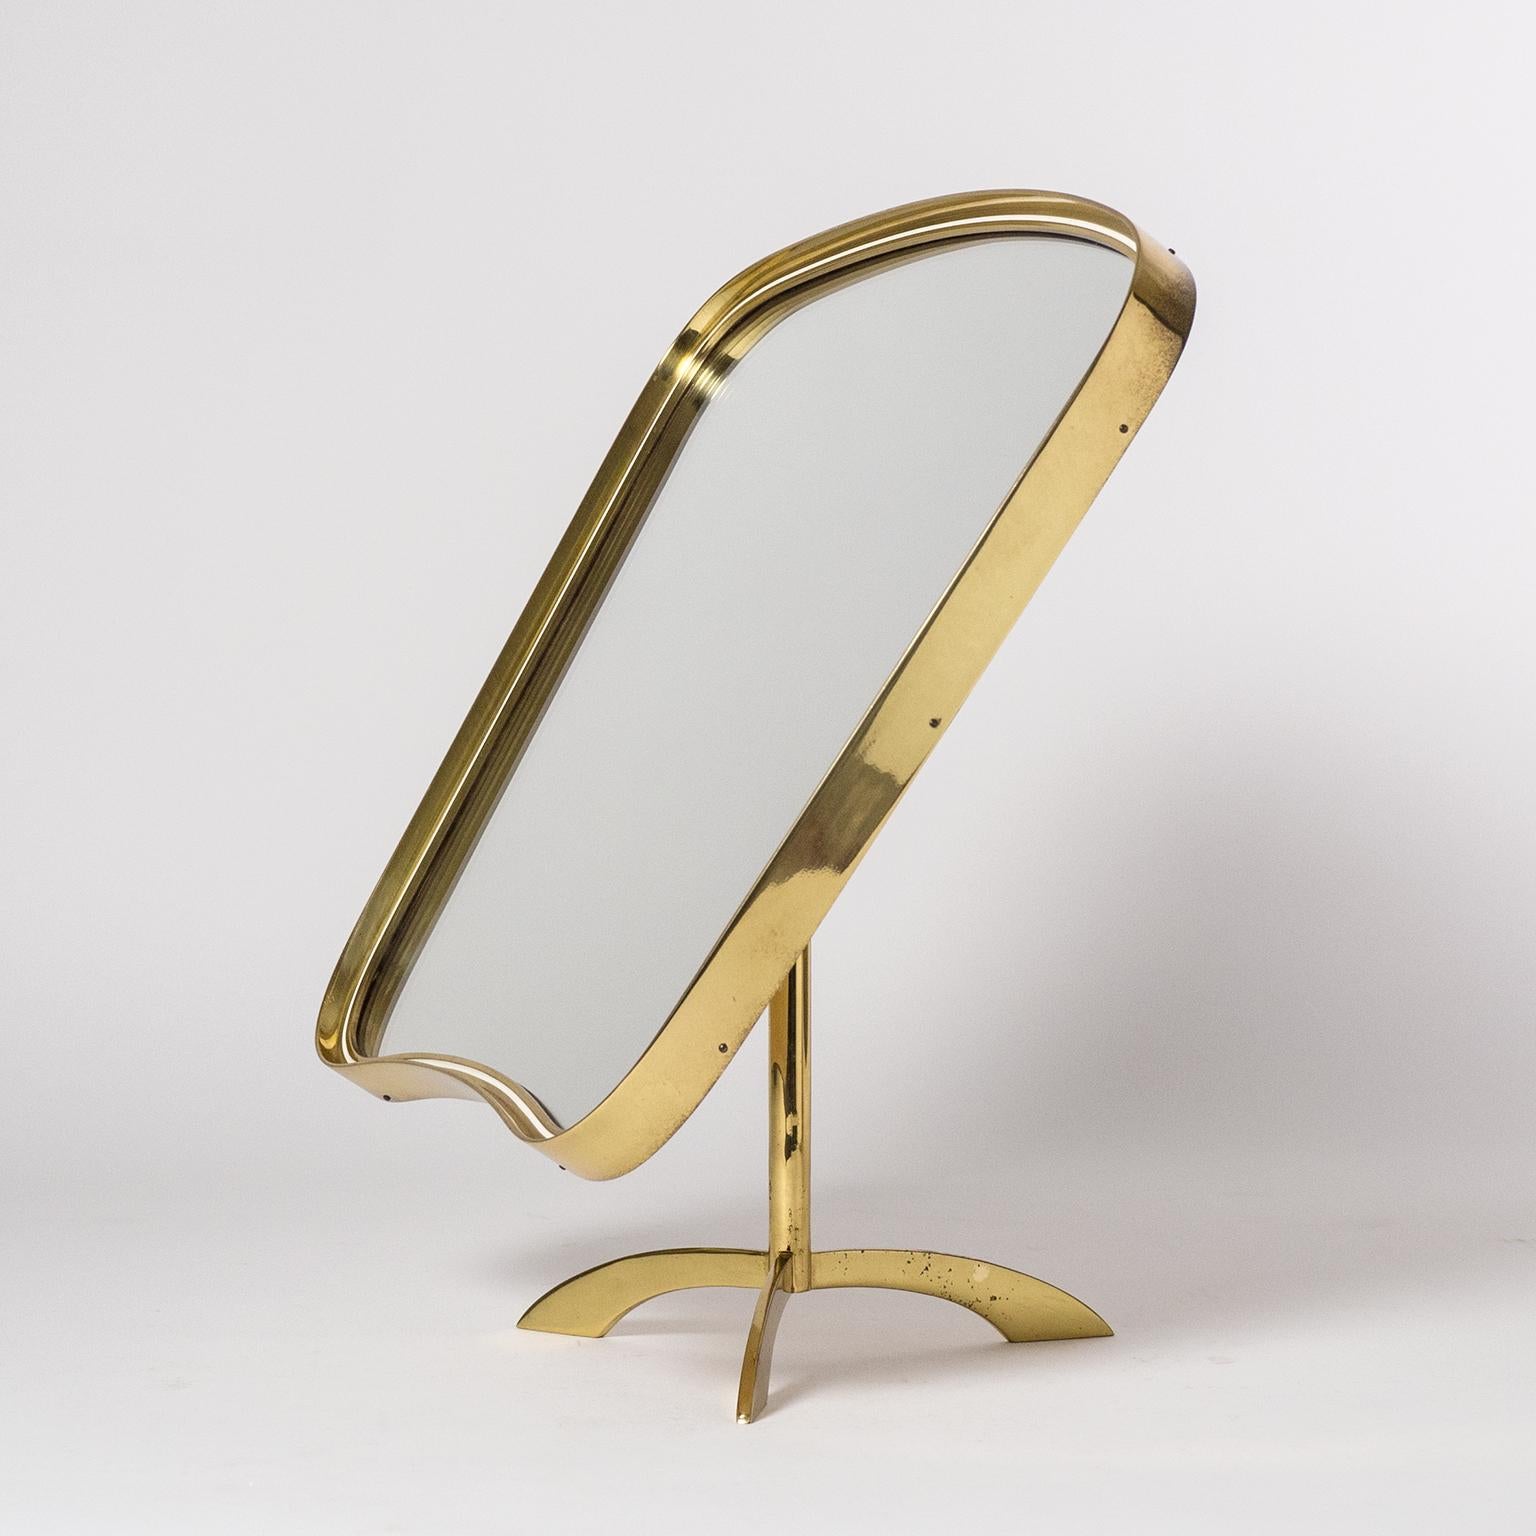 Rare large brass vanity or table mirror from the 1950s. Tripod base with and unusually large and organic shaped mirror. The continuous brass frame is approximately 1 inch thick and nicely profiled with a thin off-white enamel. The backplate is made